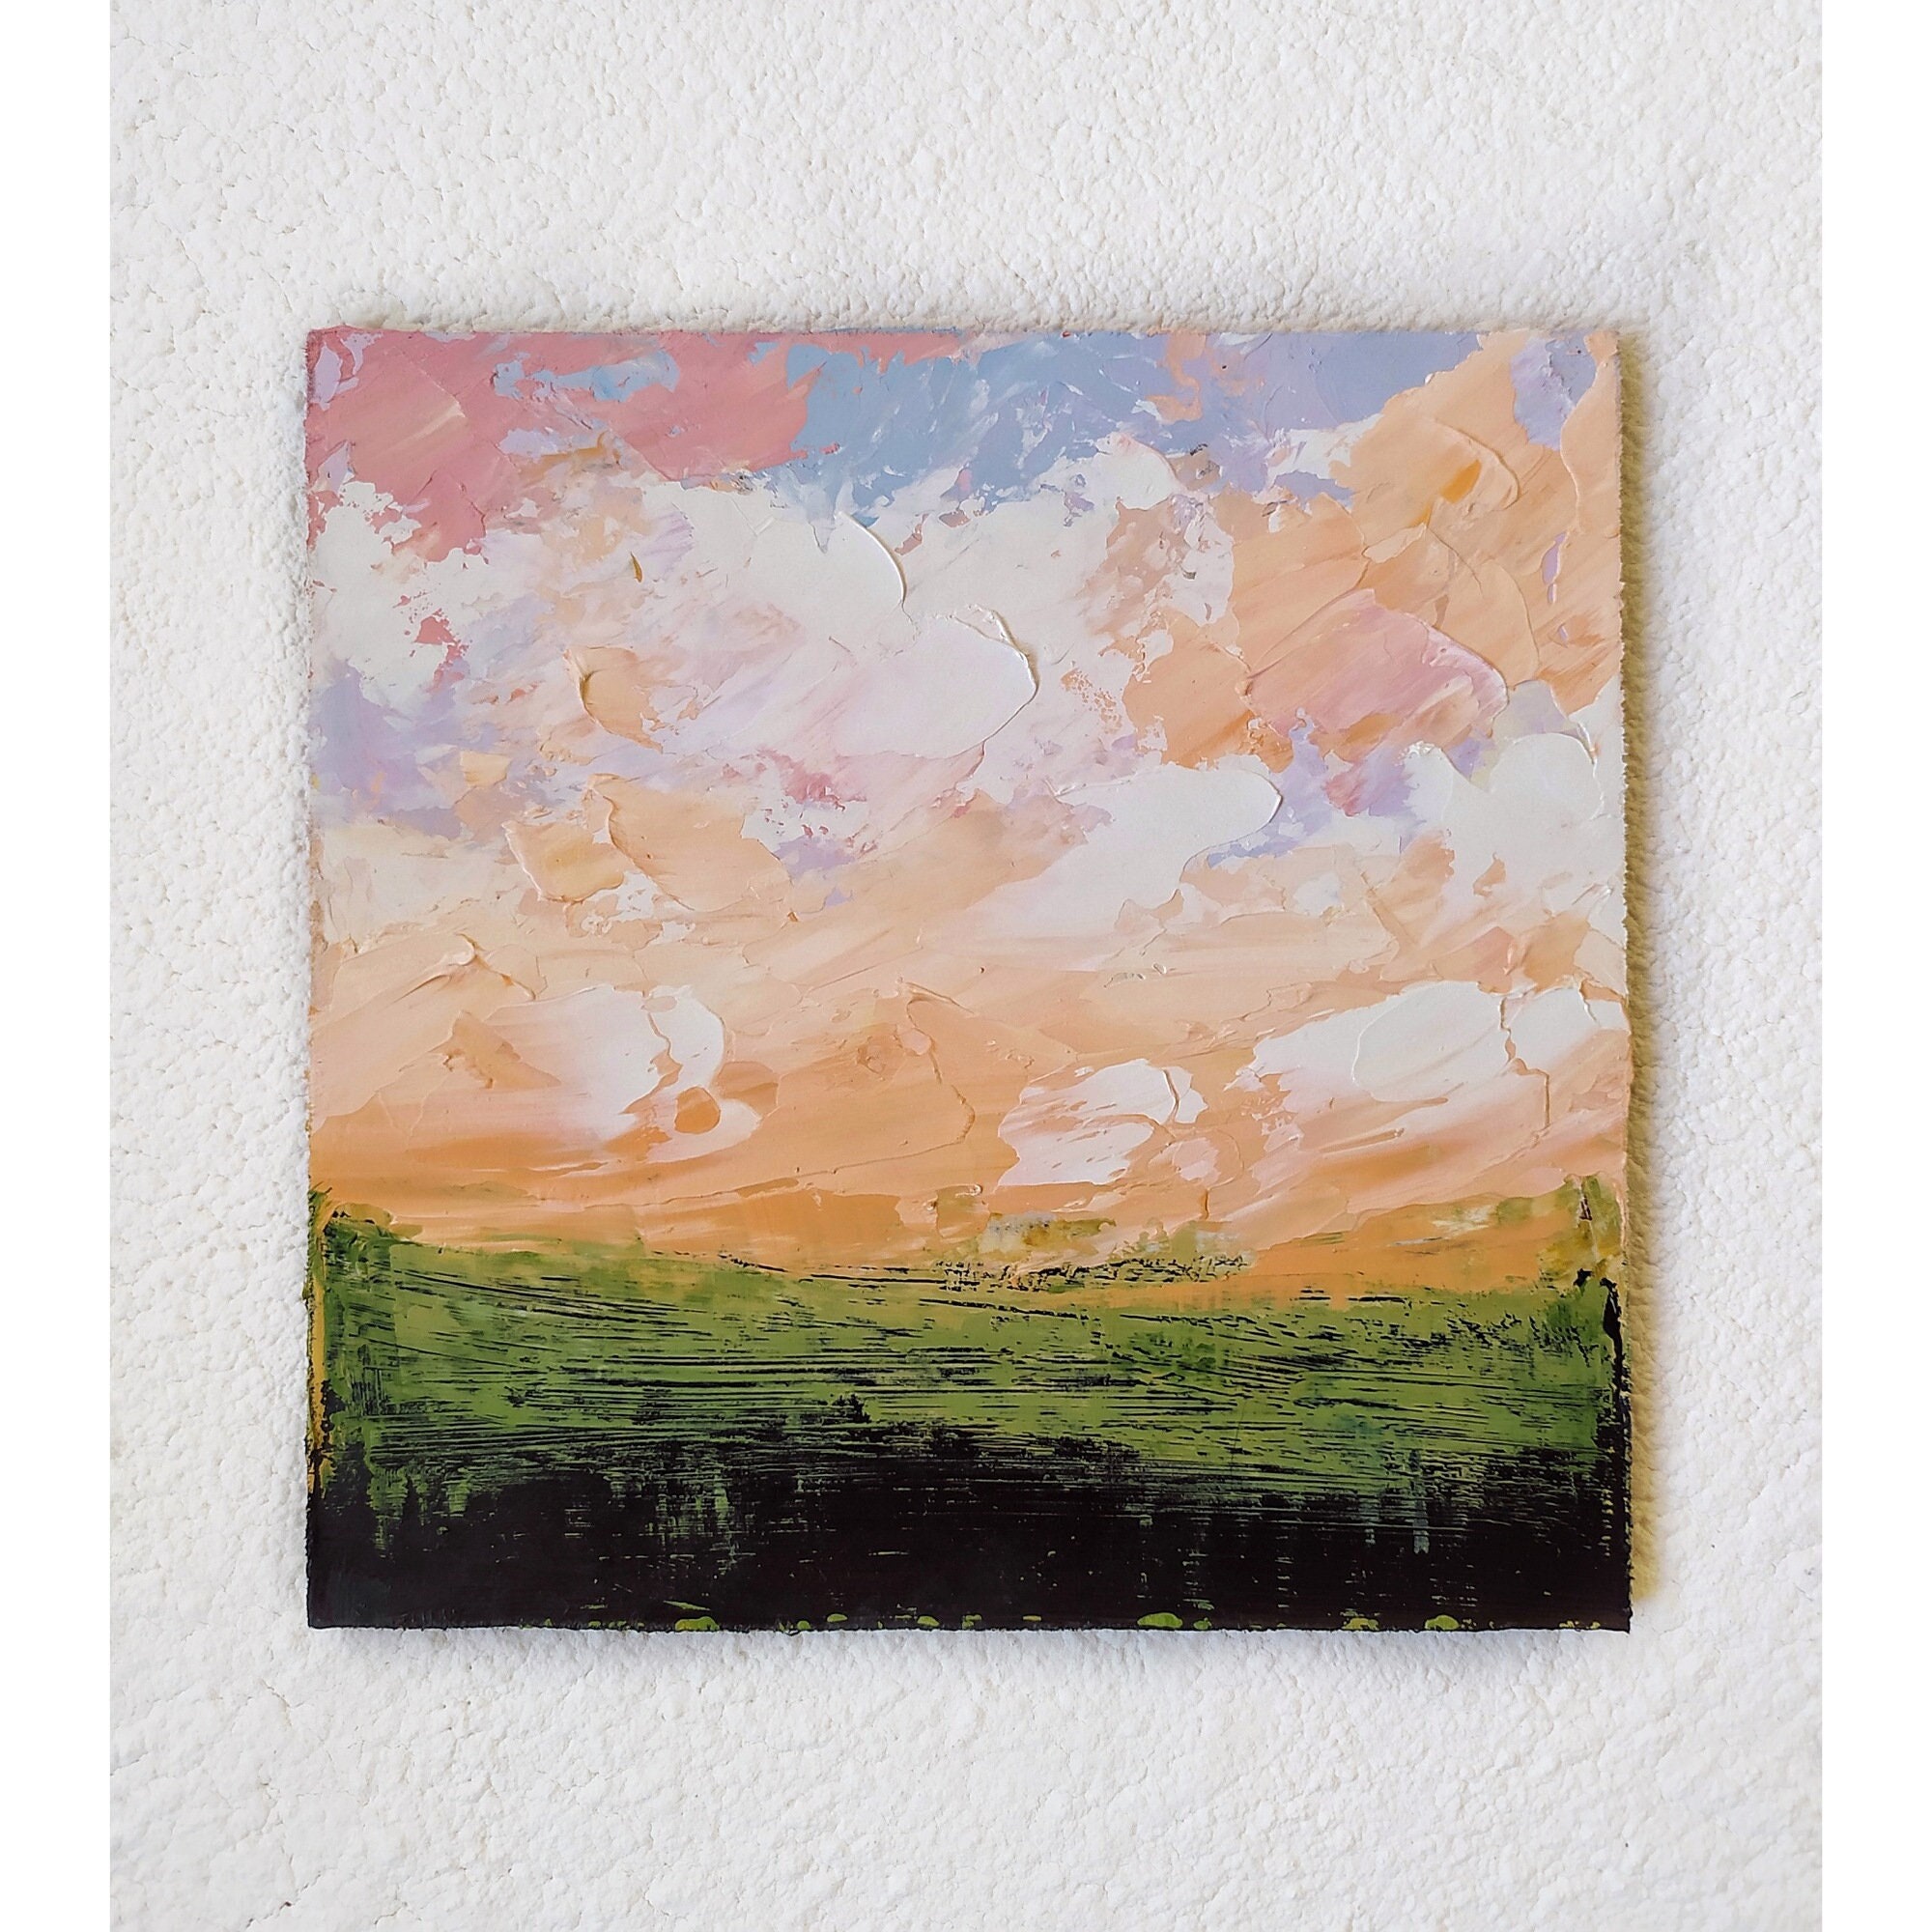 Pink Landscape Painting Sunset Picture Green Field Oil Paints Square Small Art Home Decor Wall Decor Original Painting 6x6 inch